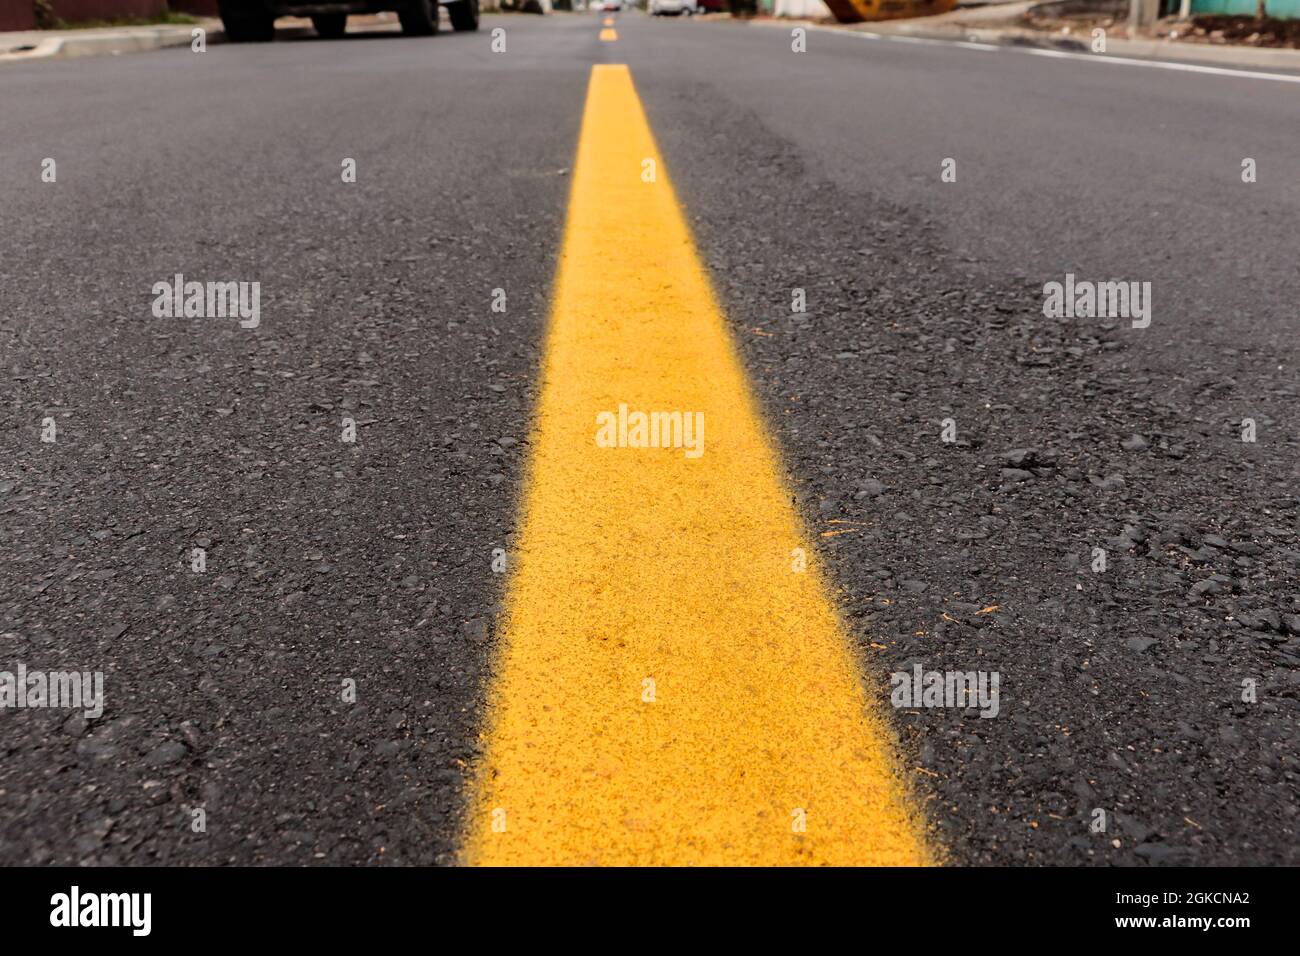 Asphalt track freshly made with some dirt and its texture, with a yellow strip painted in the center of the image and above the street horizon Stock Photo